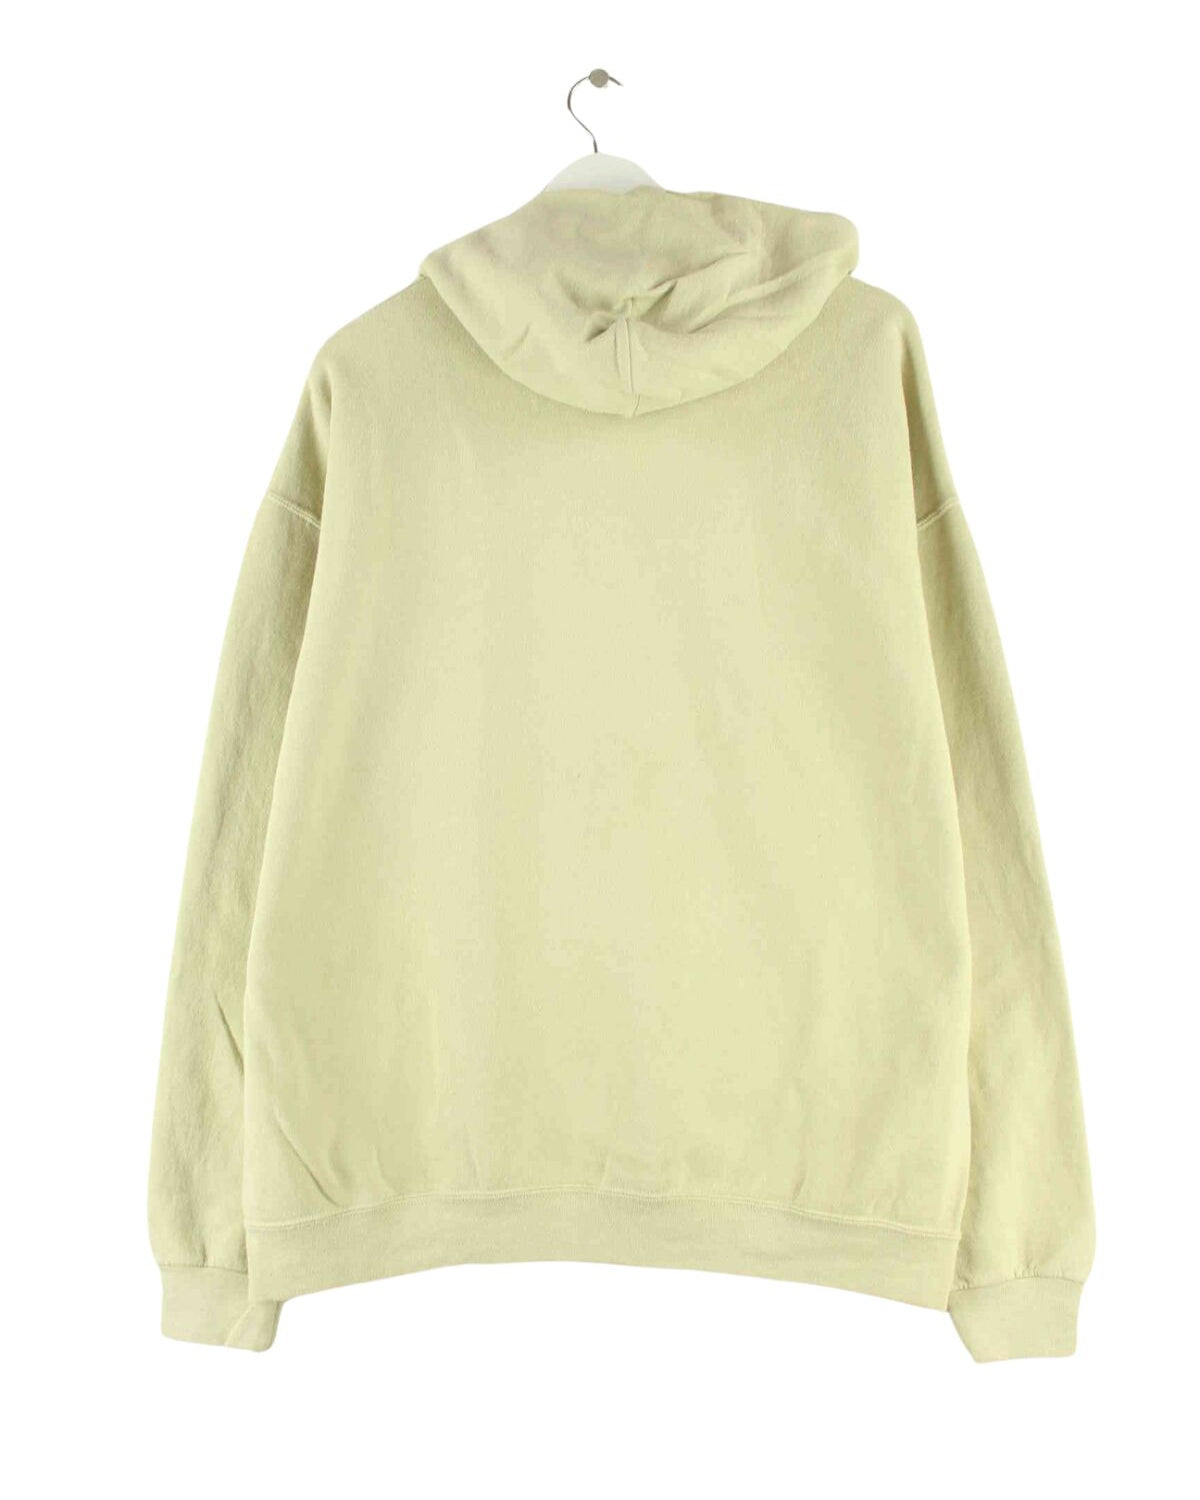 Fruit of the Loom Embroidered Hoodie Beige L (back image)